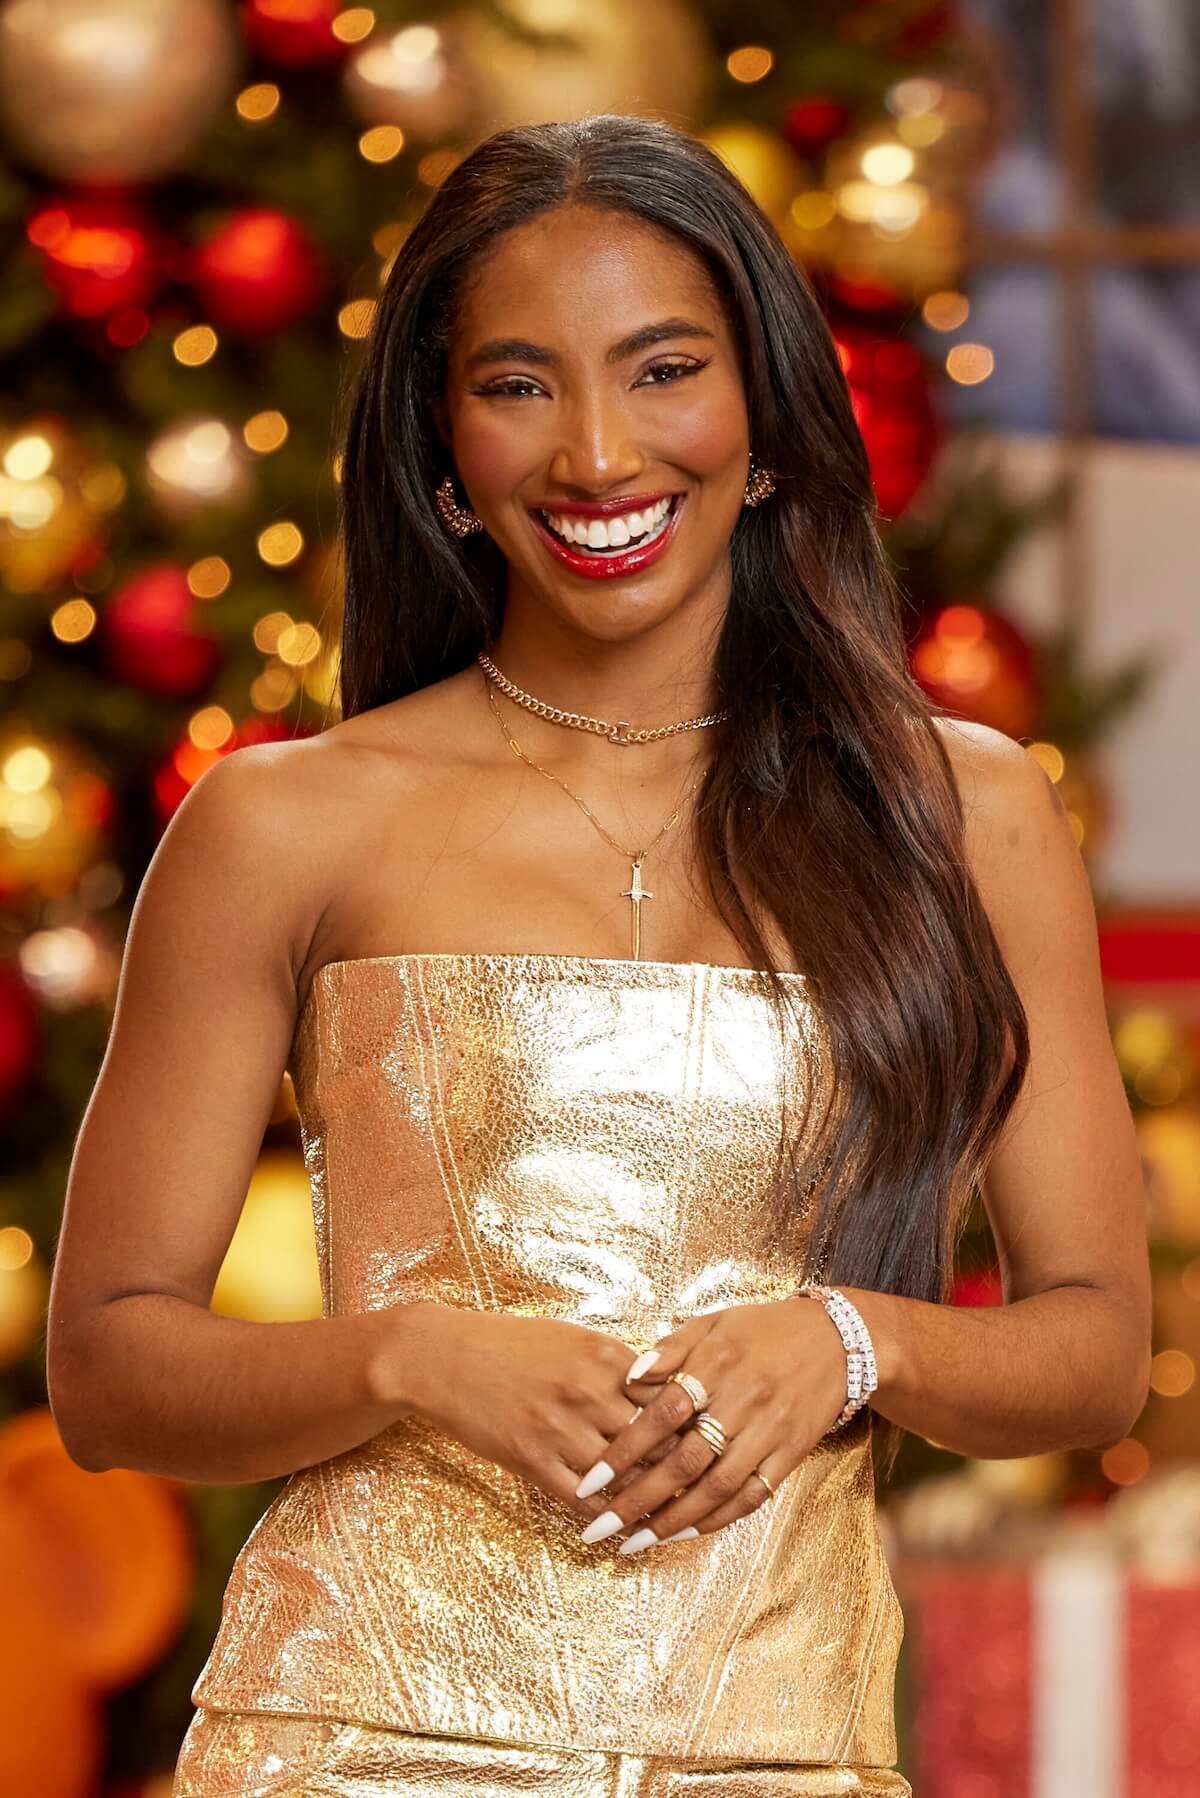 Taylor Hale of 'Big Brother Reindeer Games' posing in front of Christmas decorations